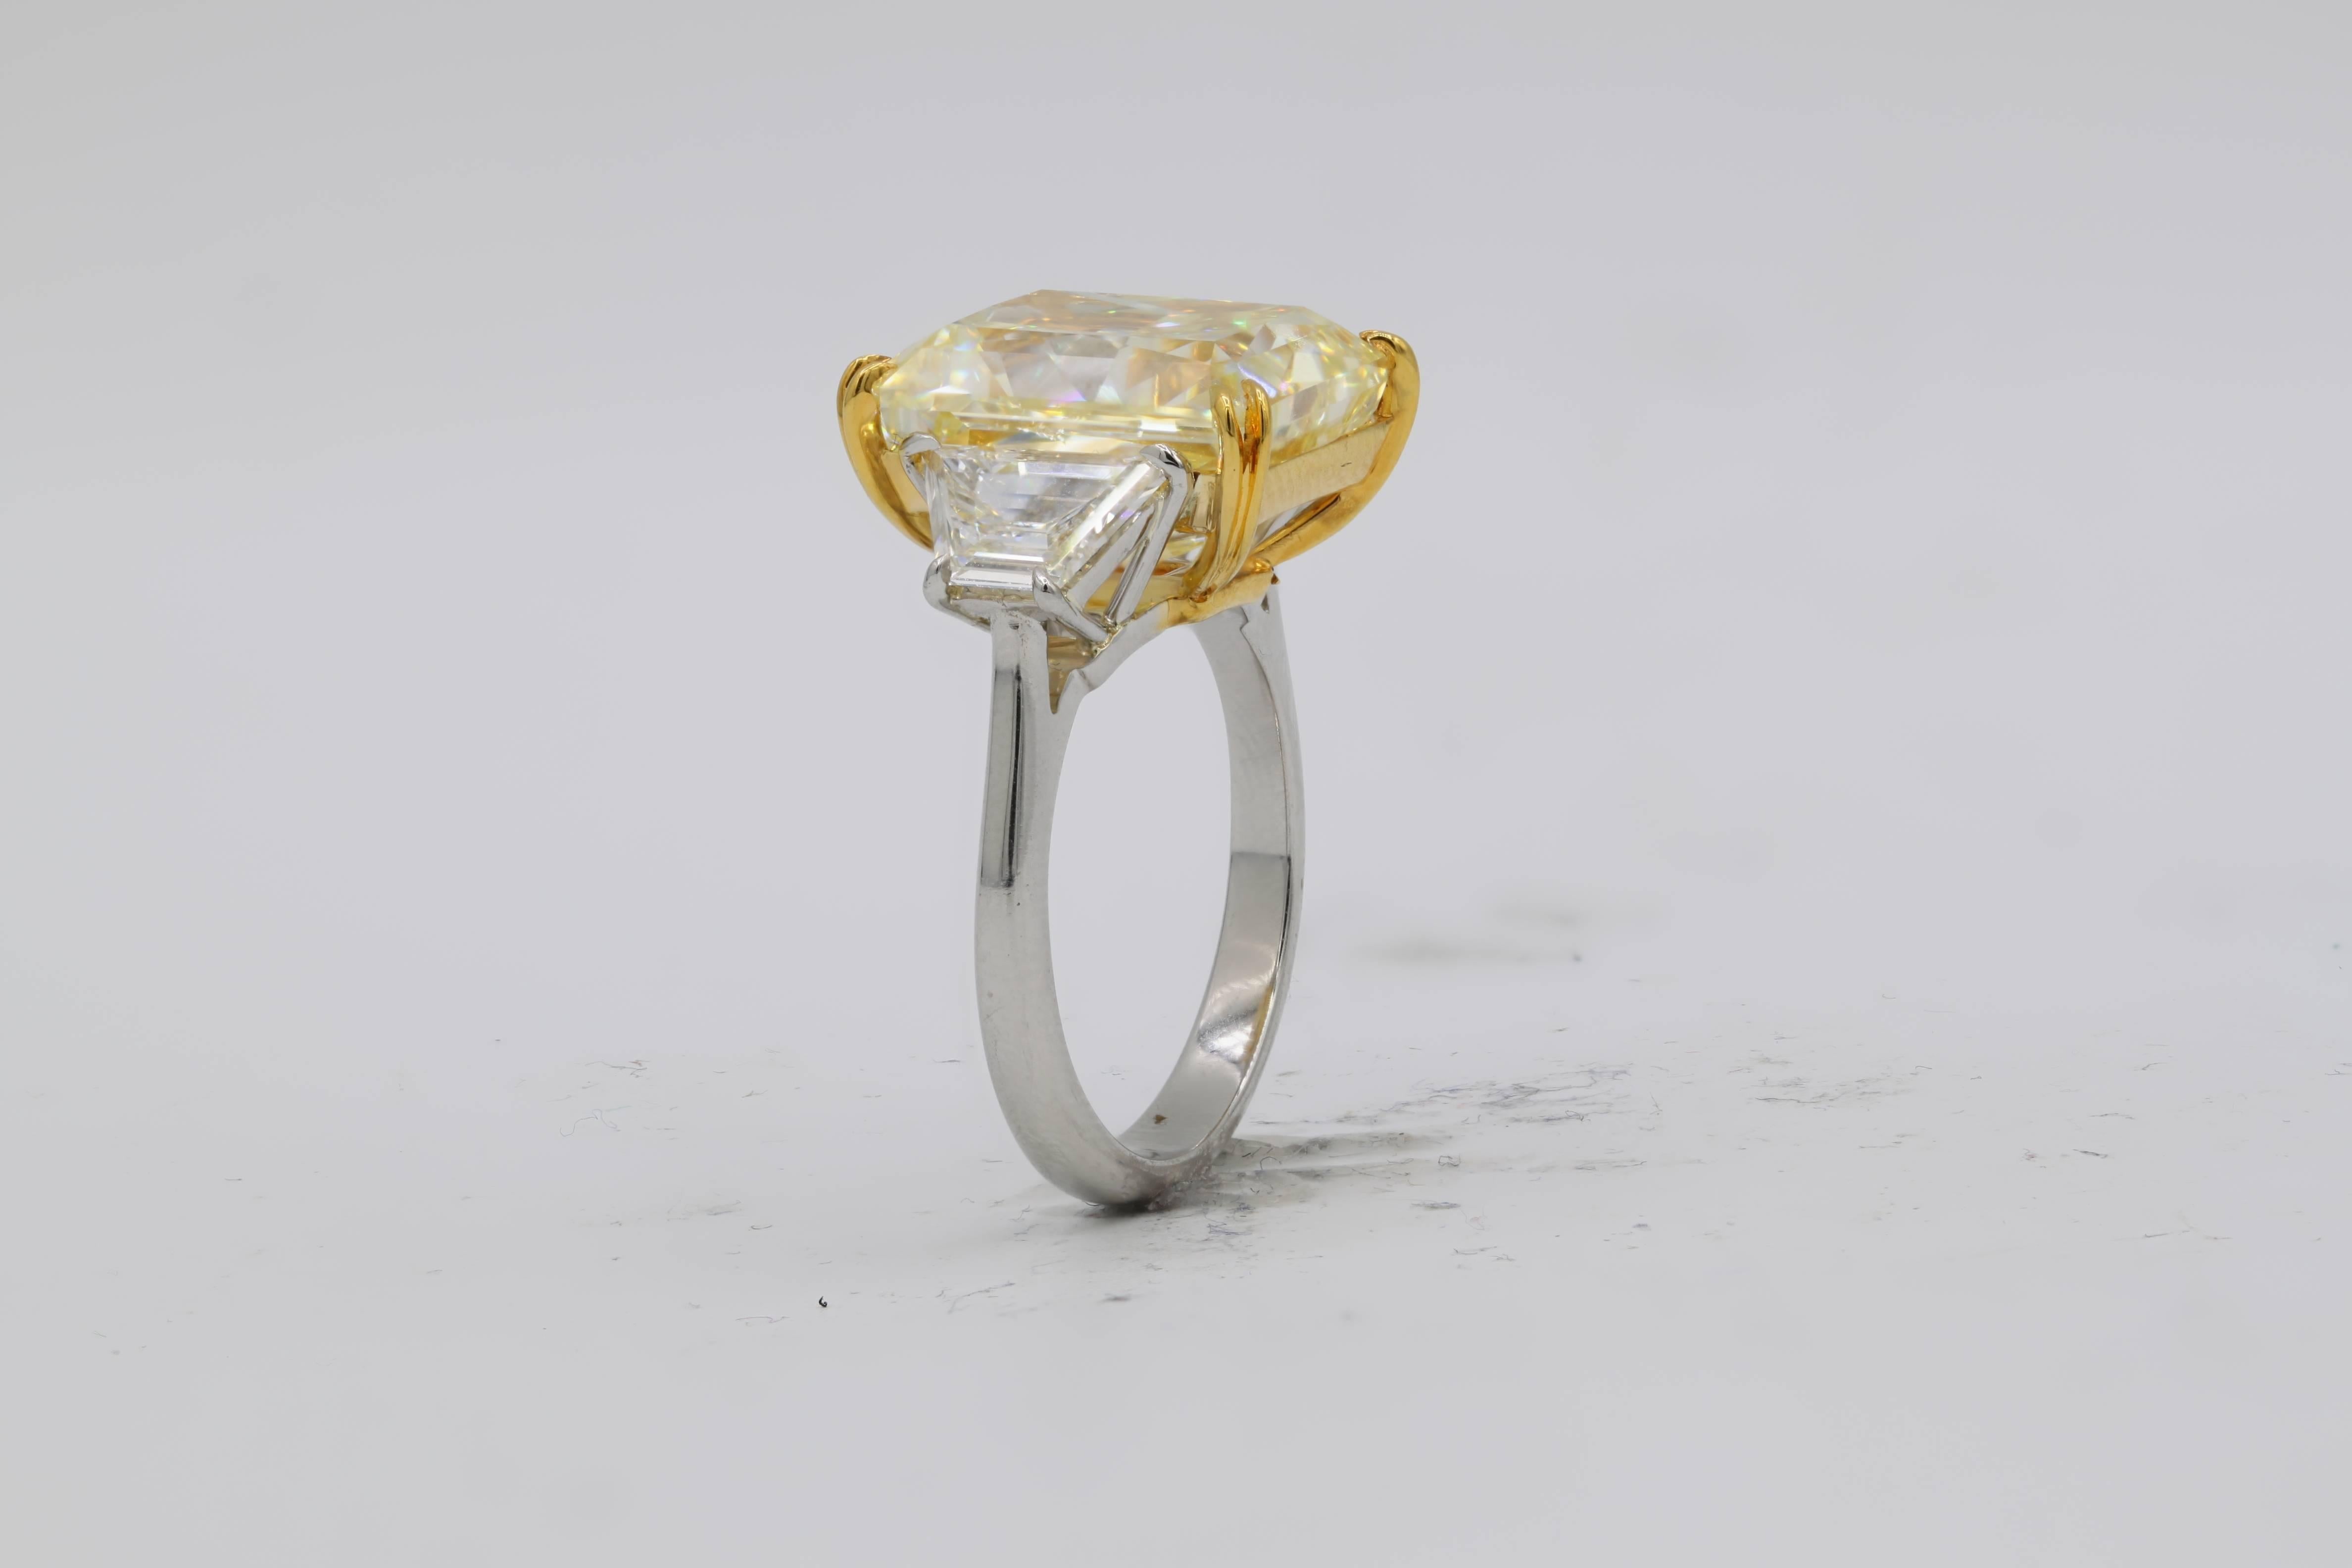 Stunning three stone Canary Yellow Diamond  Ring, very Rare elongated Radiant, nice vivid color.
The Center stone is 10.03 Carats Fancy Yellow SI1 in Clarity Radiant. Set with 1.21 Carats of Trapezoids on each side. Set in Platinum. 
Comes with GIA